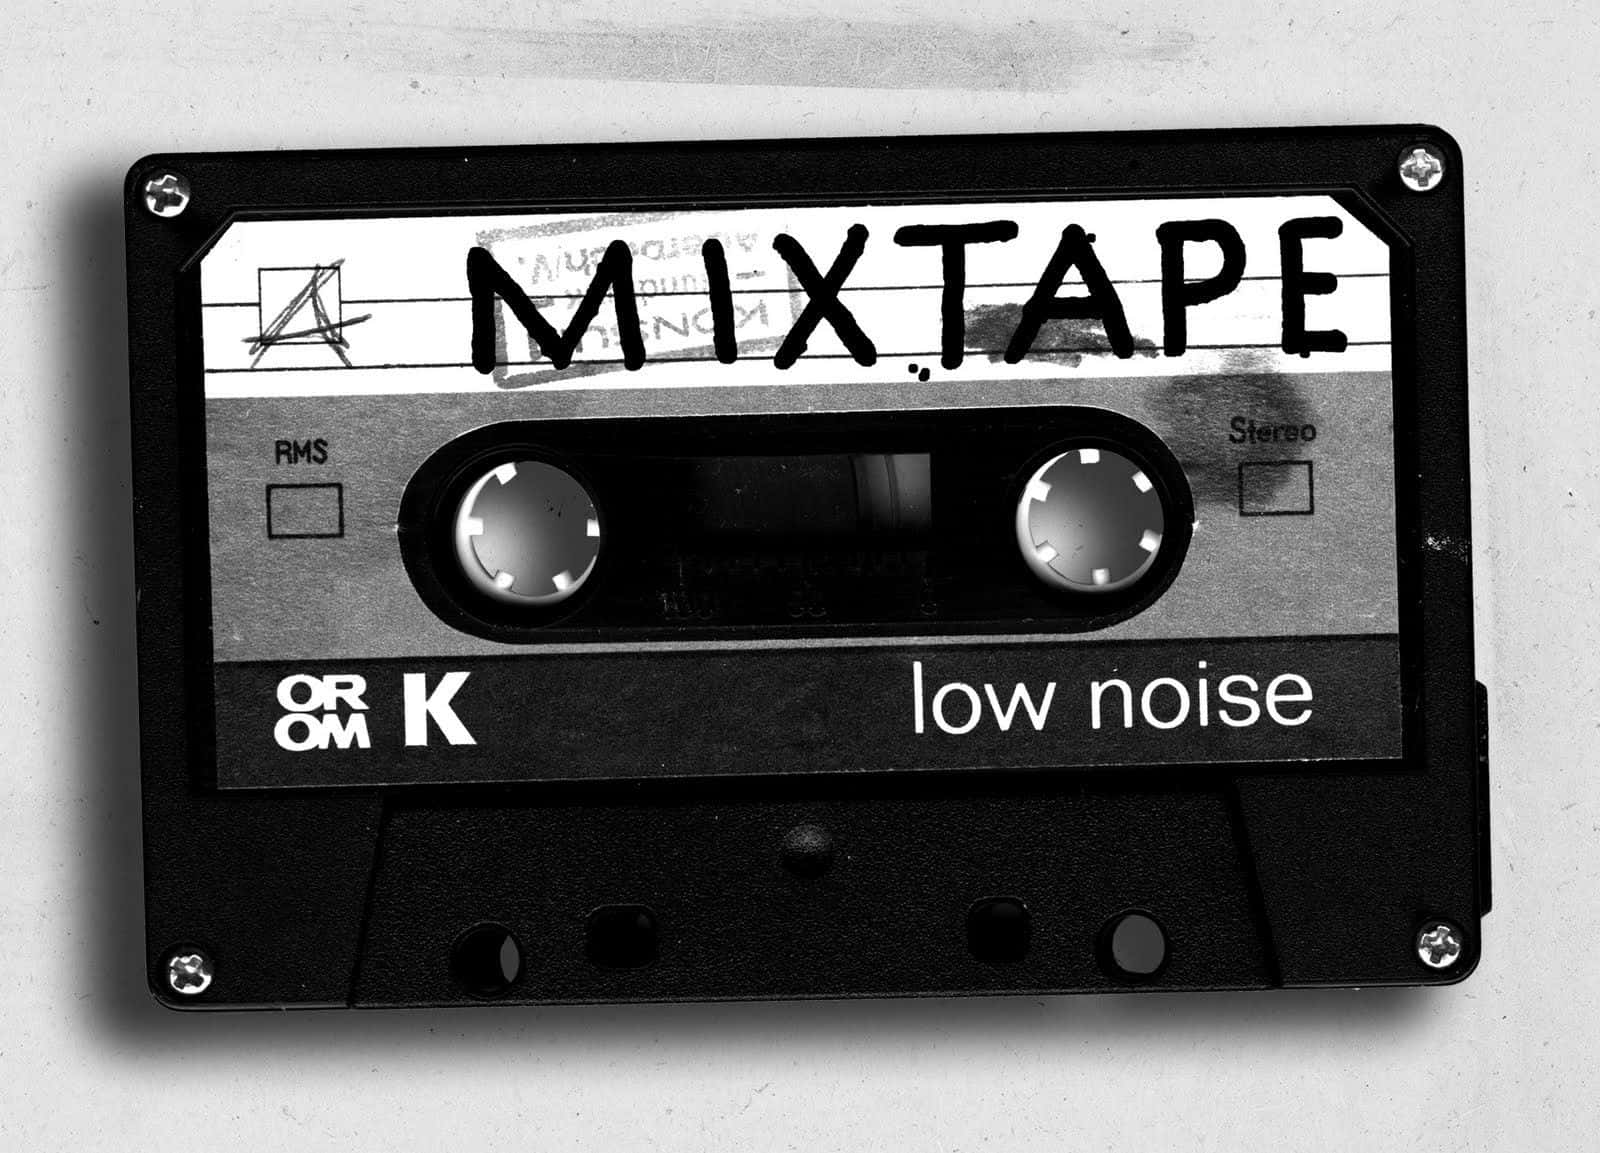 Listen to your favorite collections of music with Mixtape!